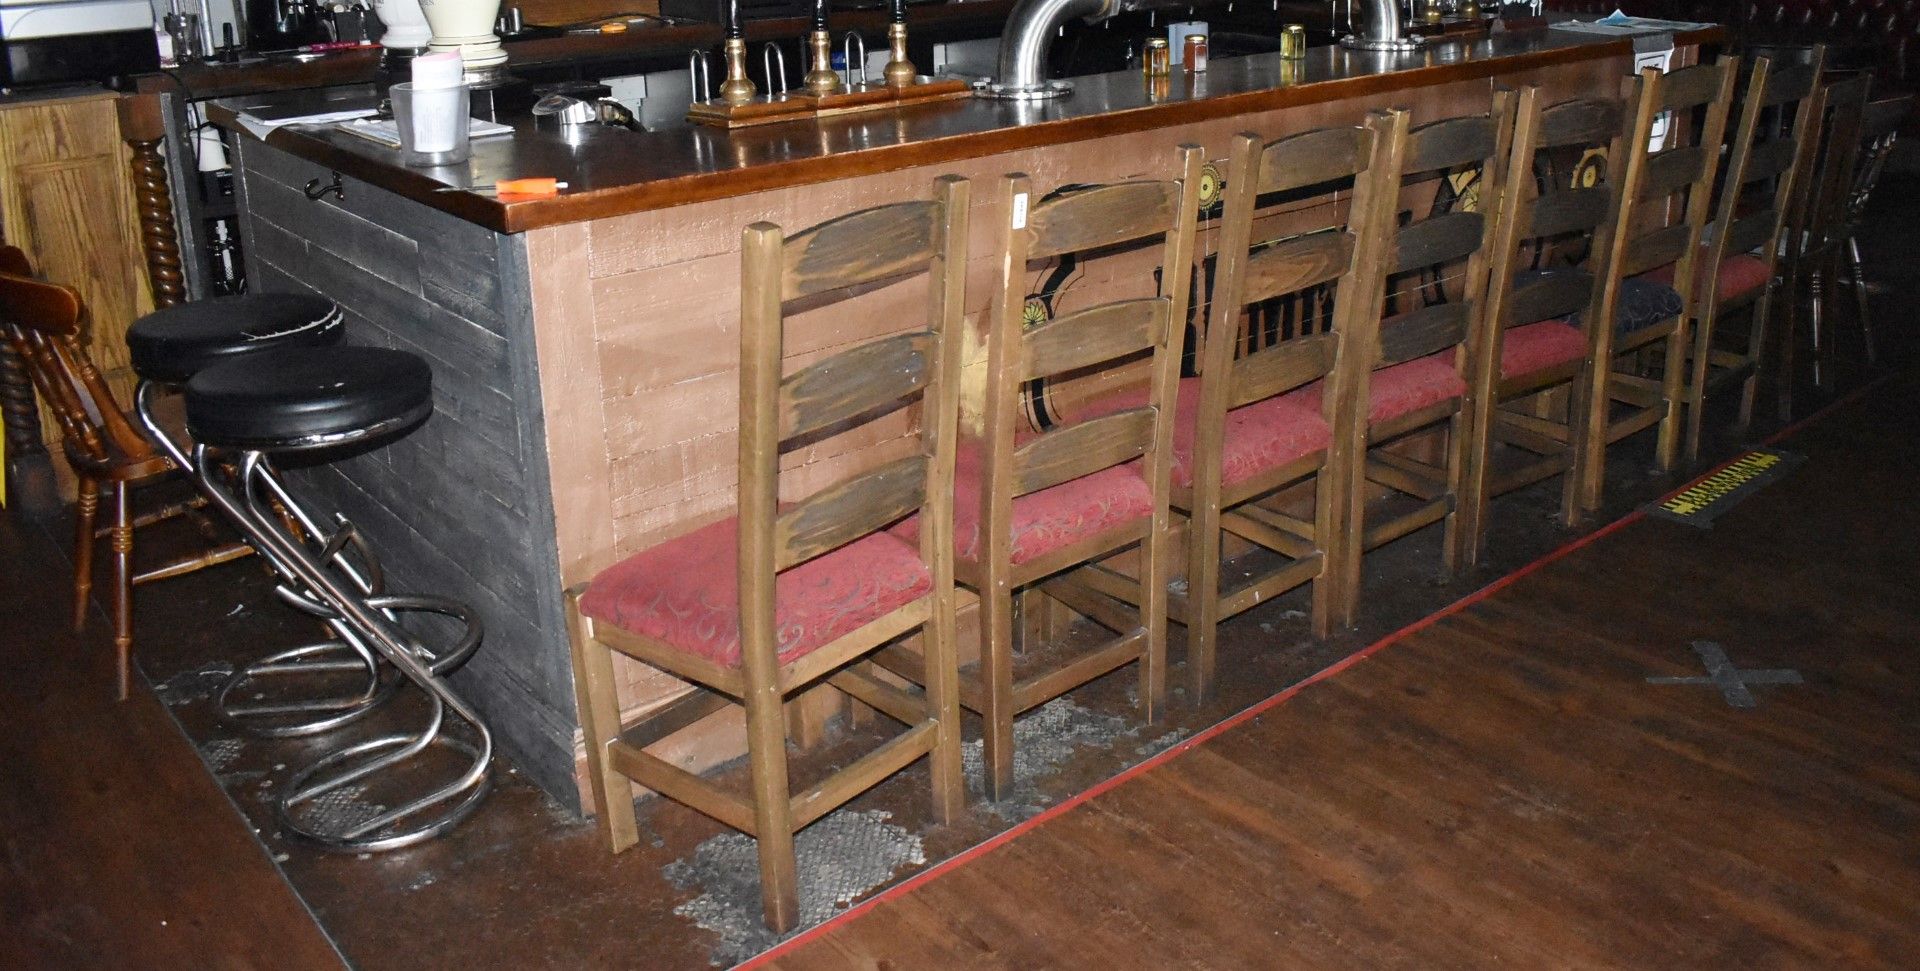 Approx 30 x Various Restaurant / Pub Chairs and Stools - Many Vintage Chairs Included - CL586 -